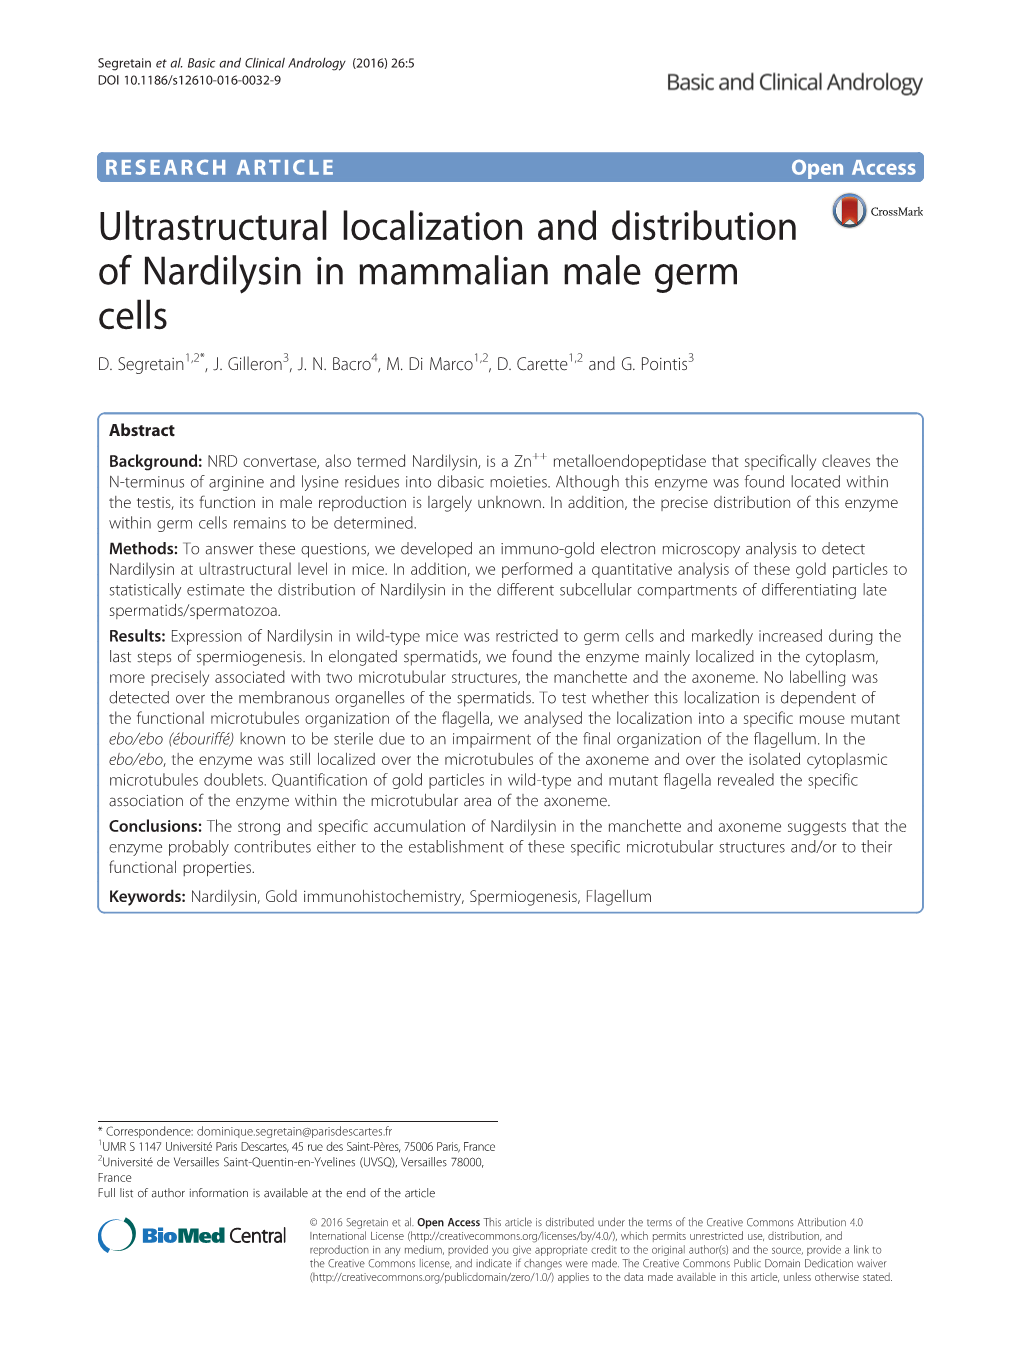 Ultrastructural Localization and Distribution of Nardilysin in Mammalian Male Germ Cells D